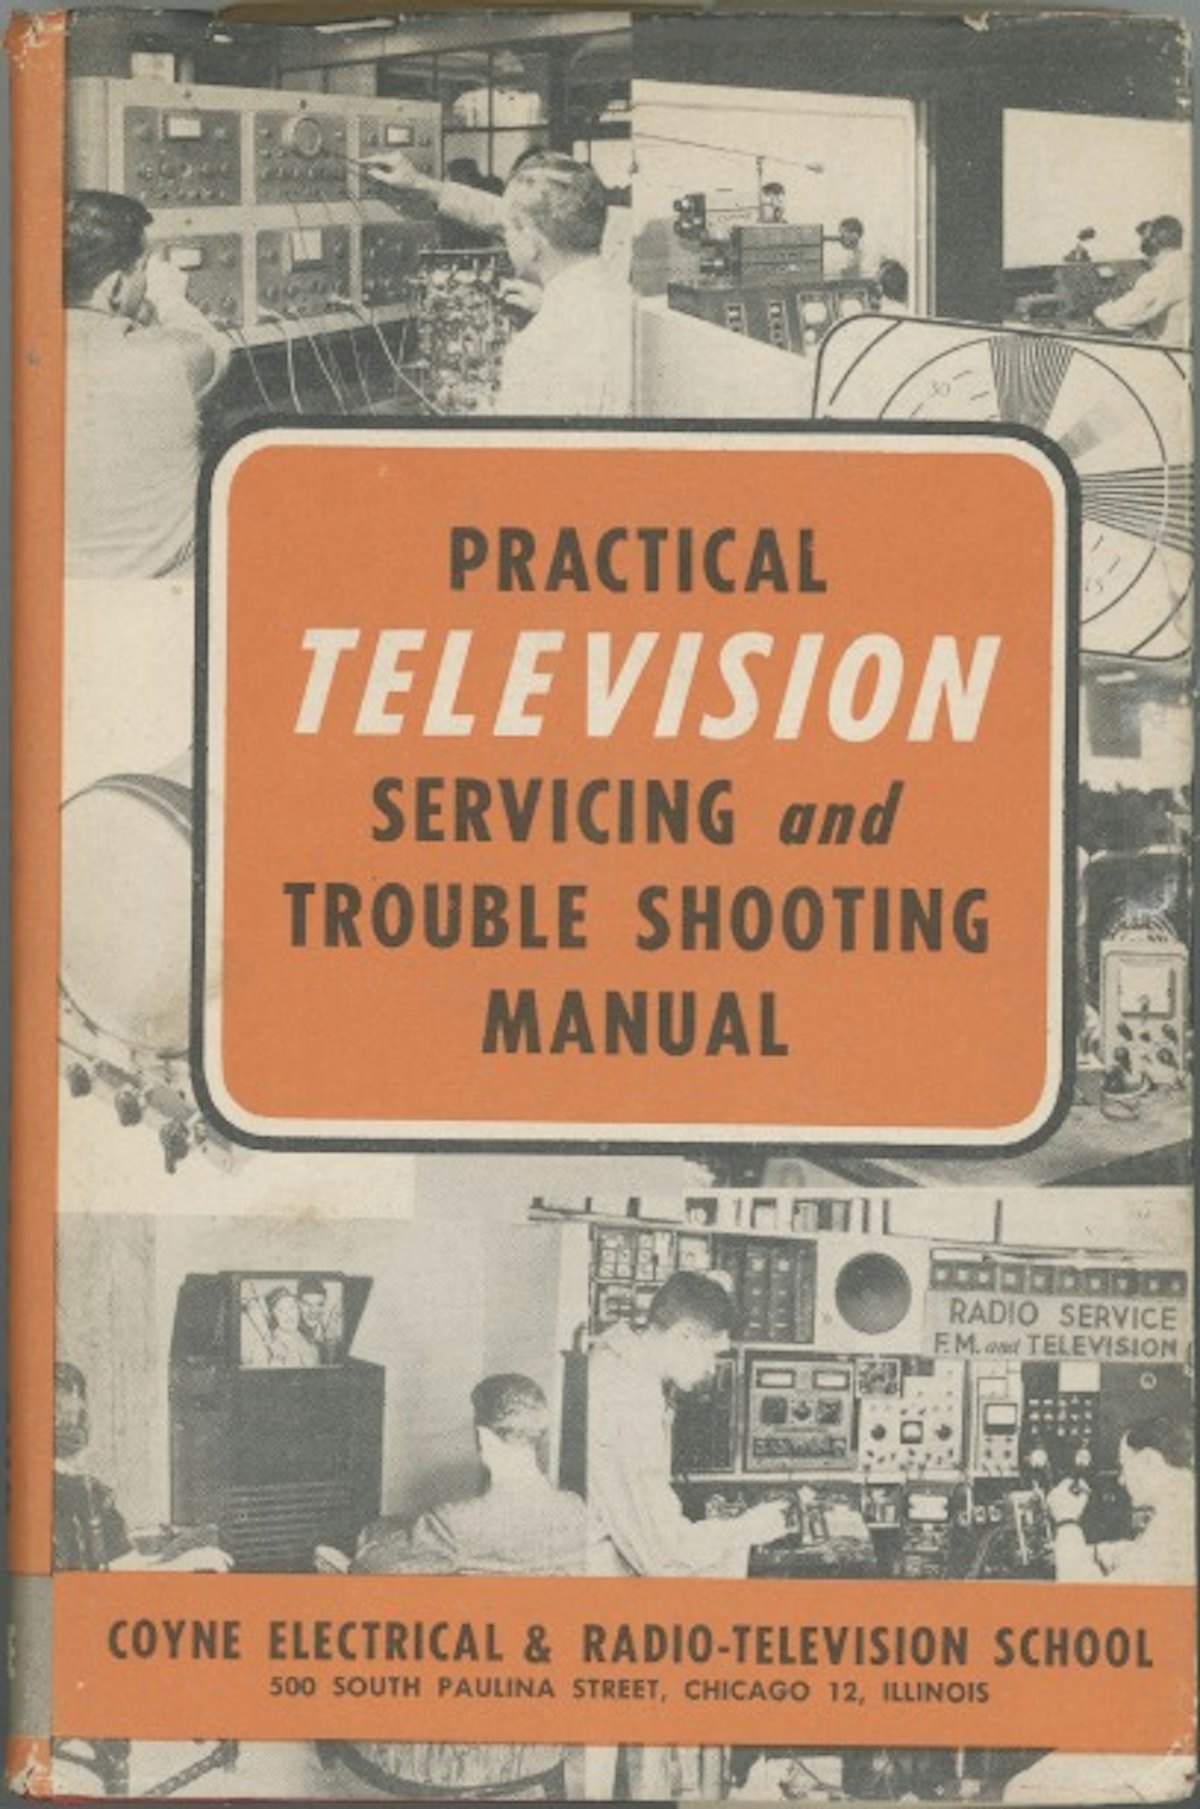 Practical Television Servicing and Trouble Shooting Manual